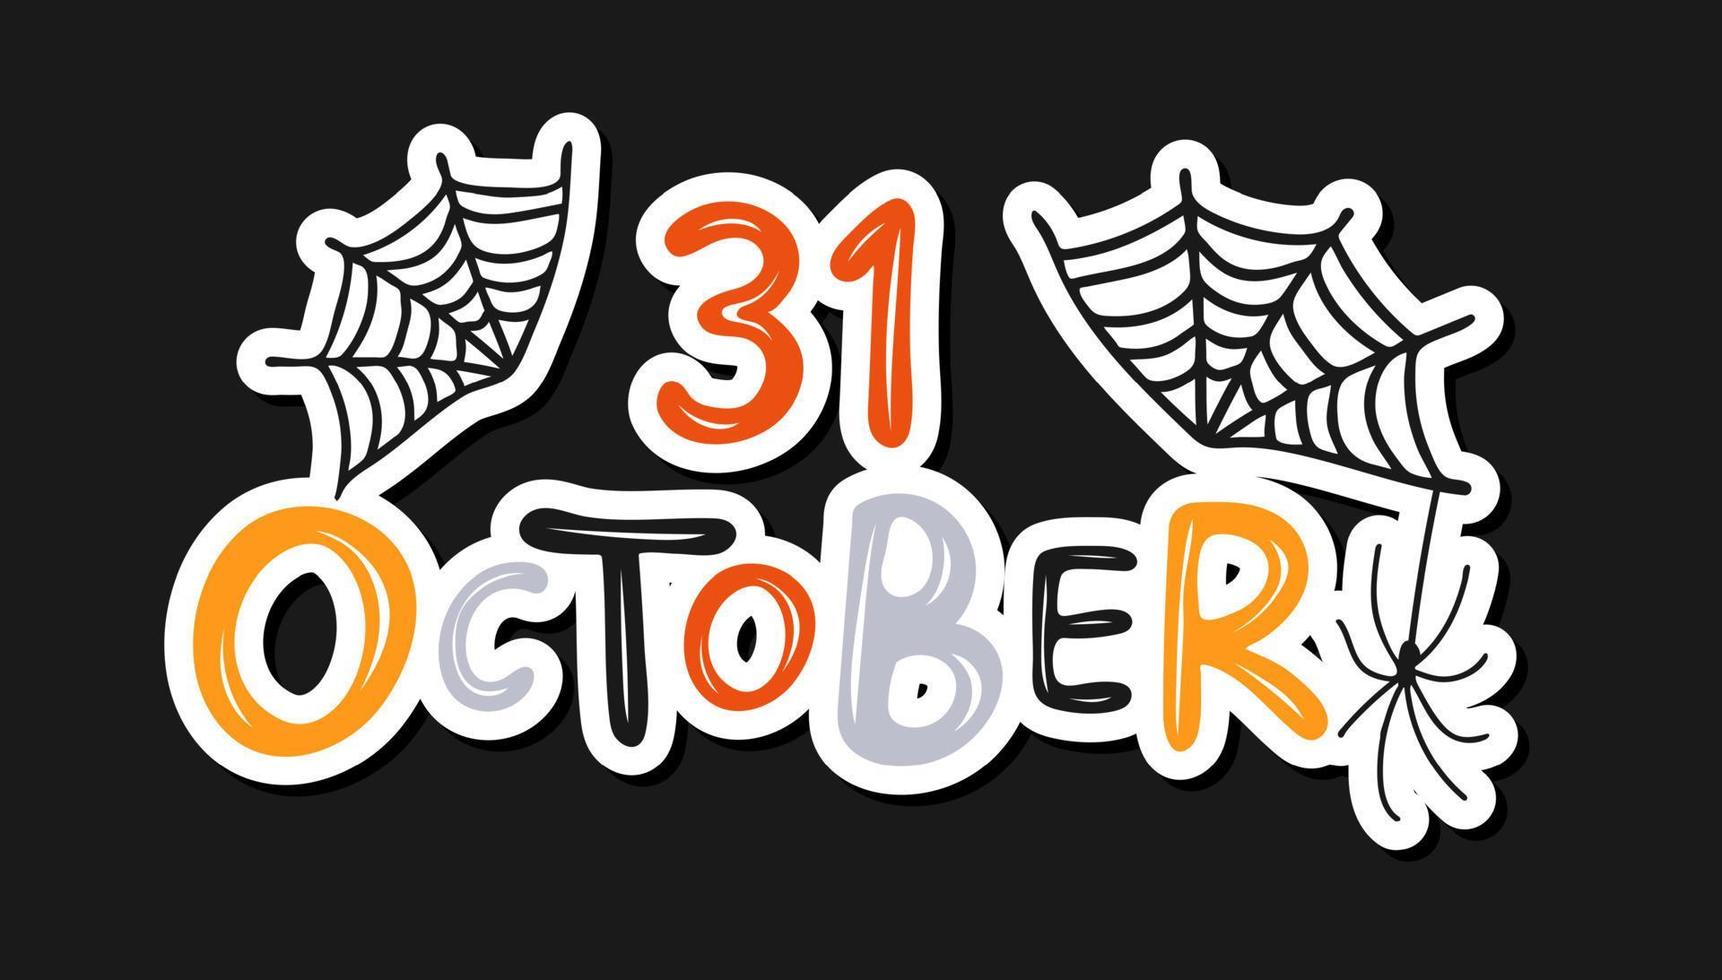 31 october. Cute Halloween design with spider and spider webs vector